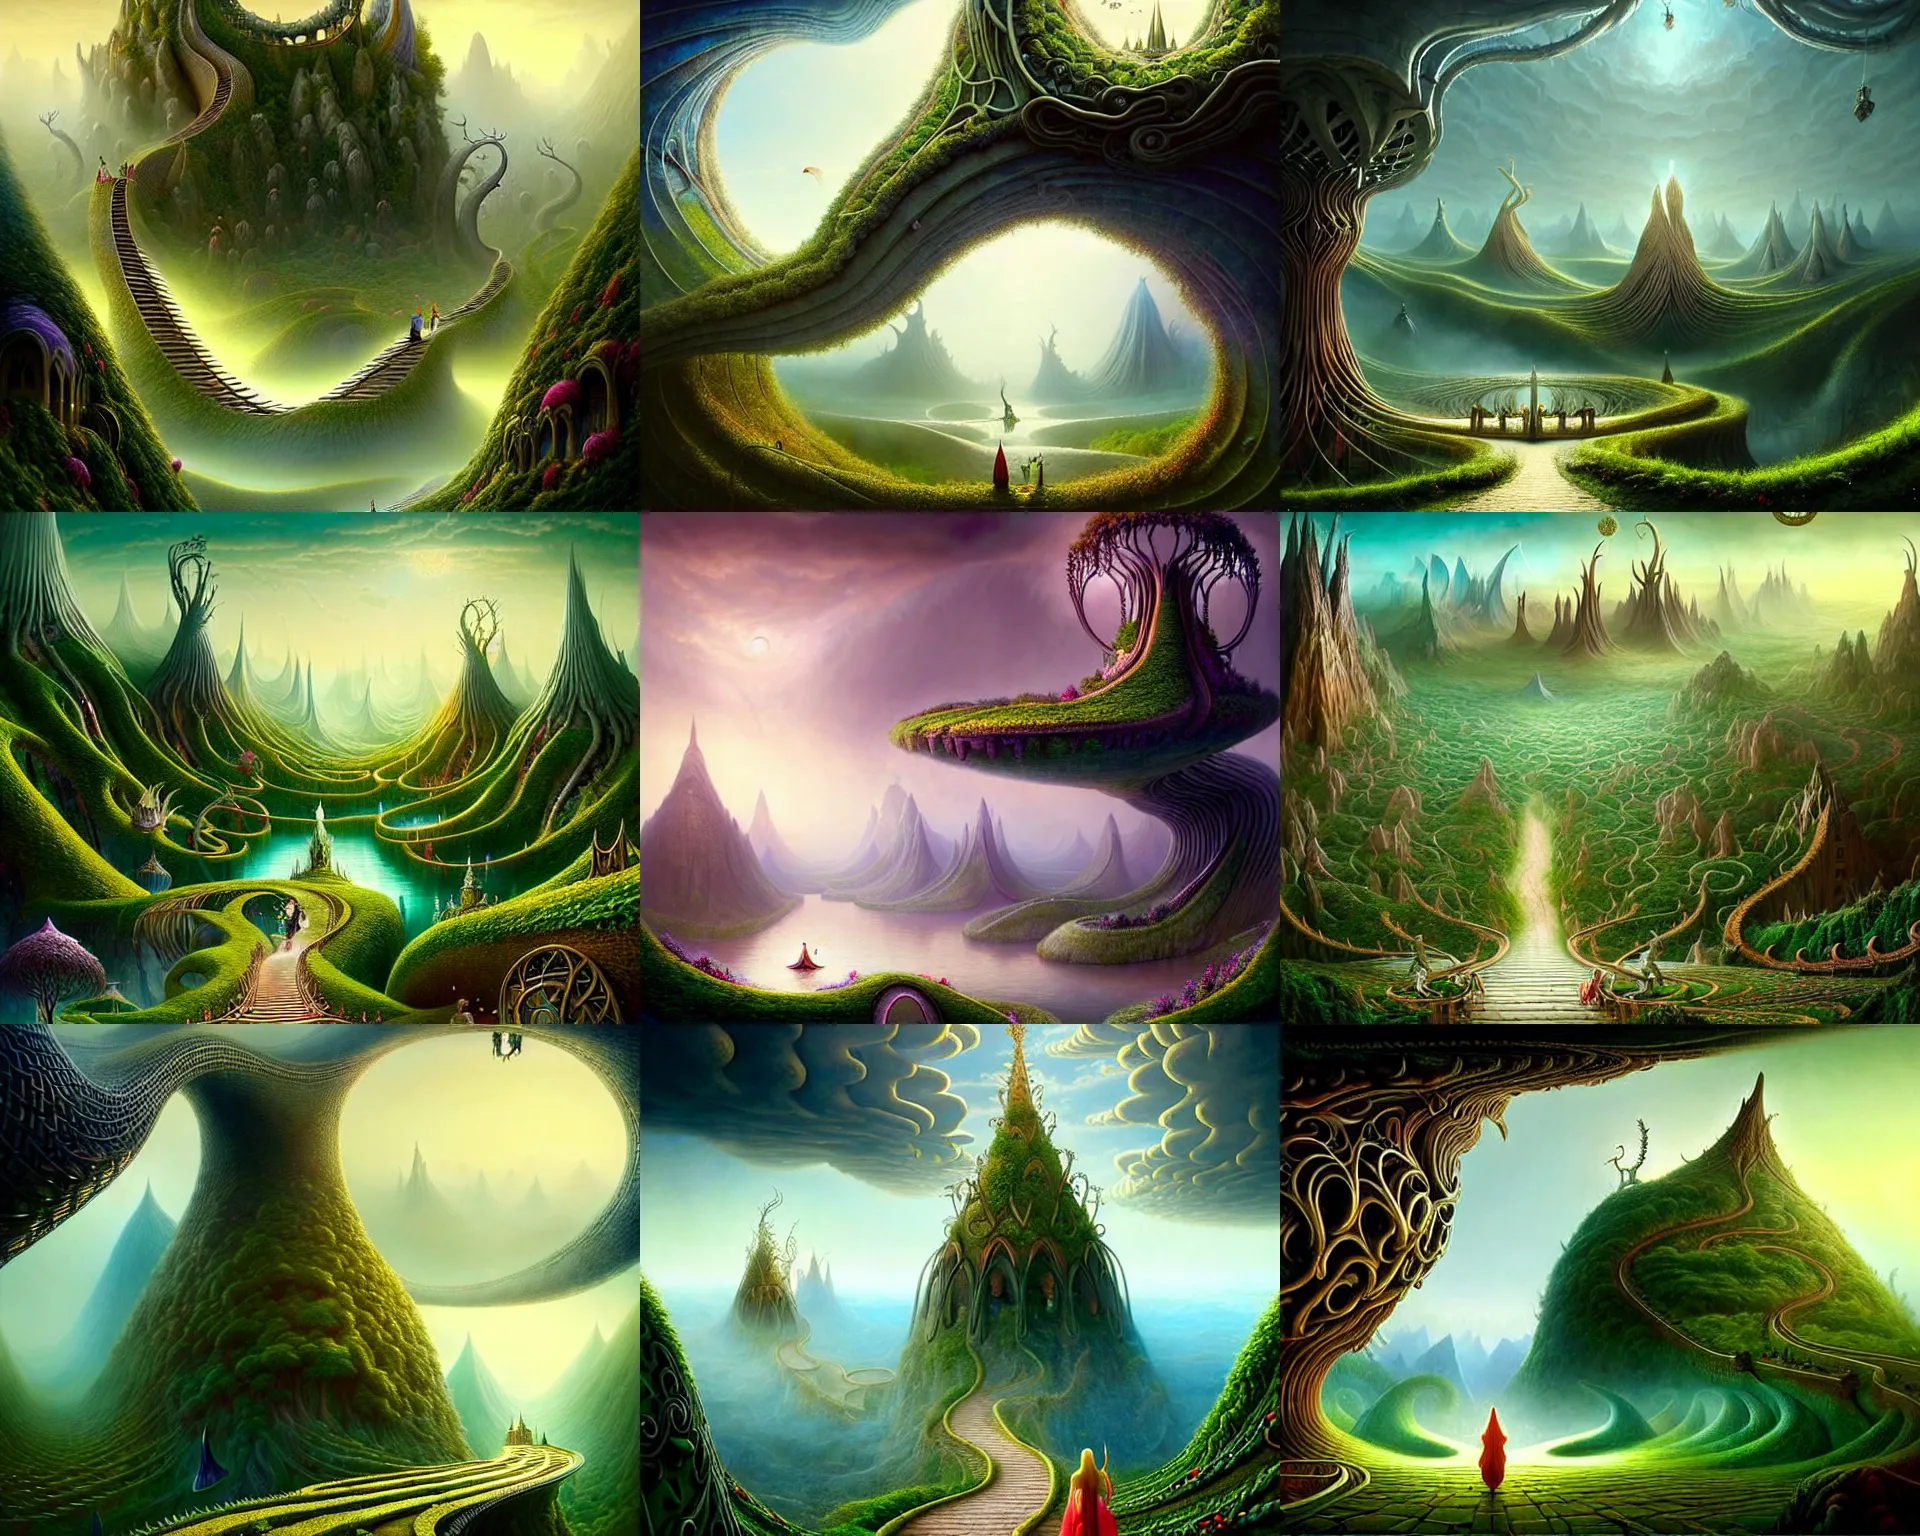 Prompt: a beguiling epic stunning beautiful and insanely detailed matte painting of the impossible winding path through the elven kingdom with surreal architecture designed by Heironymous Bosch, mega structures inspired by Heironymous Bosch's Garden of Earthly Delights, vast surreal landscape and horizon by Asher Durand and Cyril Rolando and Andrew Ferez, masterpiece!!!, grand!, imaginative!!!, whimsical!!, epic scale, intricate details, sense of awe, elite, wonder, insanely complex, masterful composition!!!, sharp focus, fantasy realism, dramatic lighting